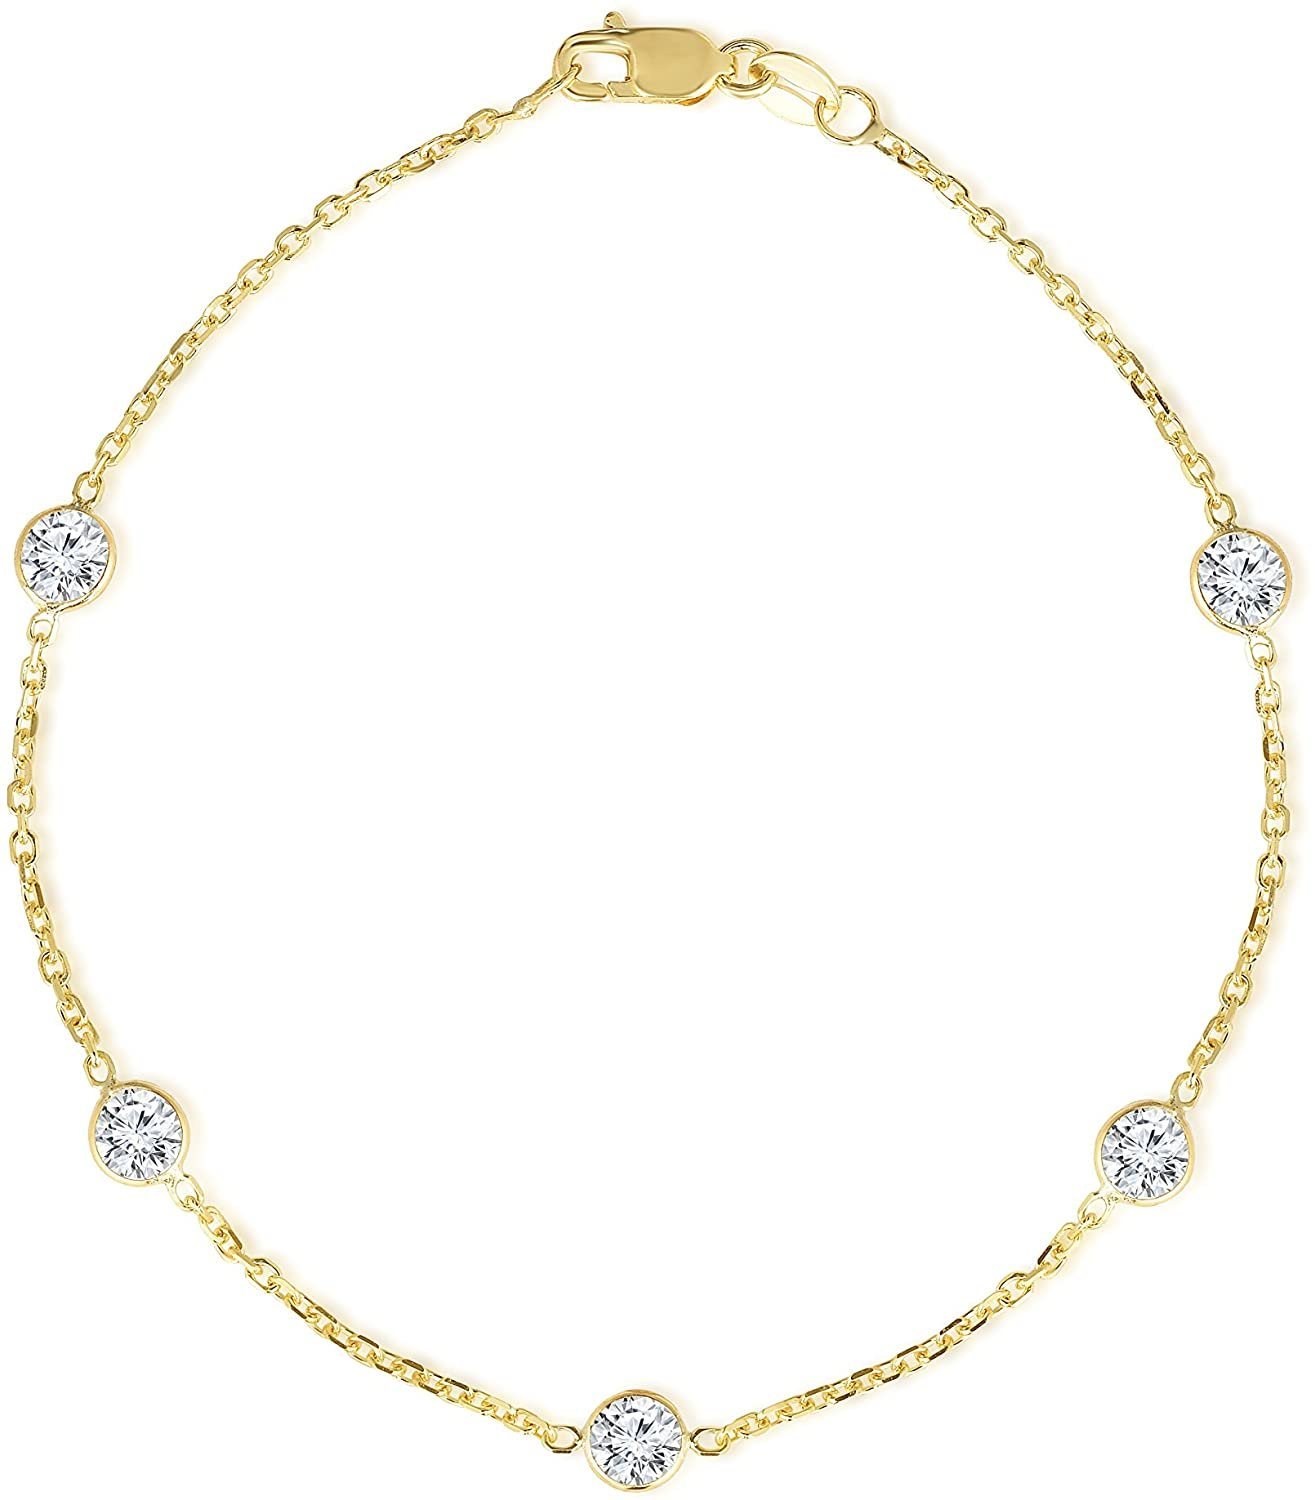 14k Yellow Gold Cubic Zirconia Cable Bracelet and Anklet, 1.4mm, Round 4mm CZ